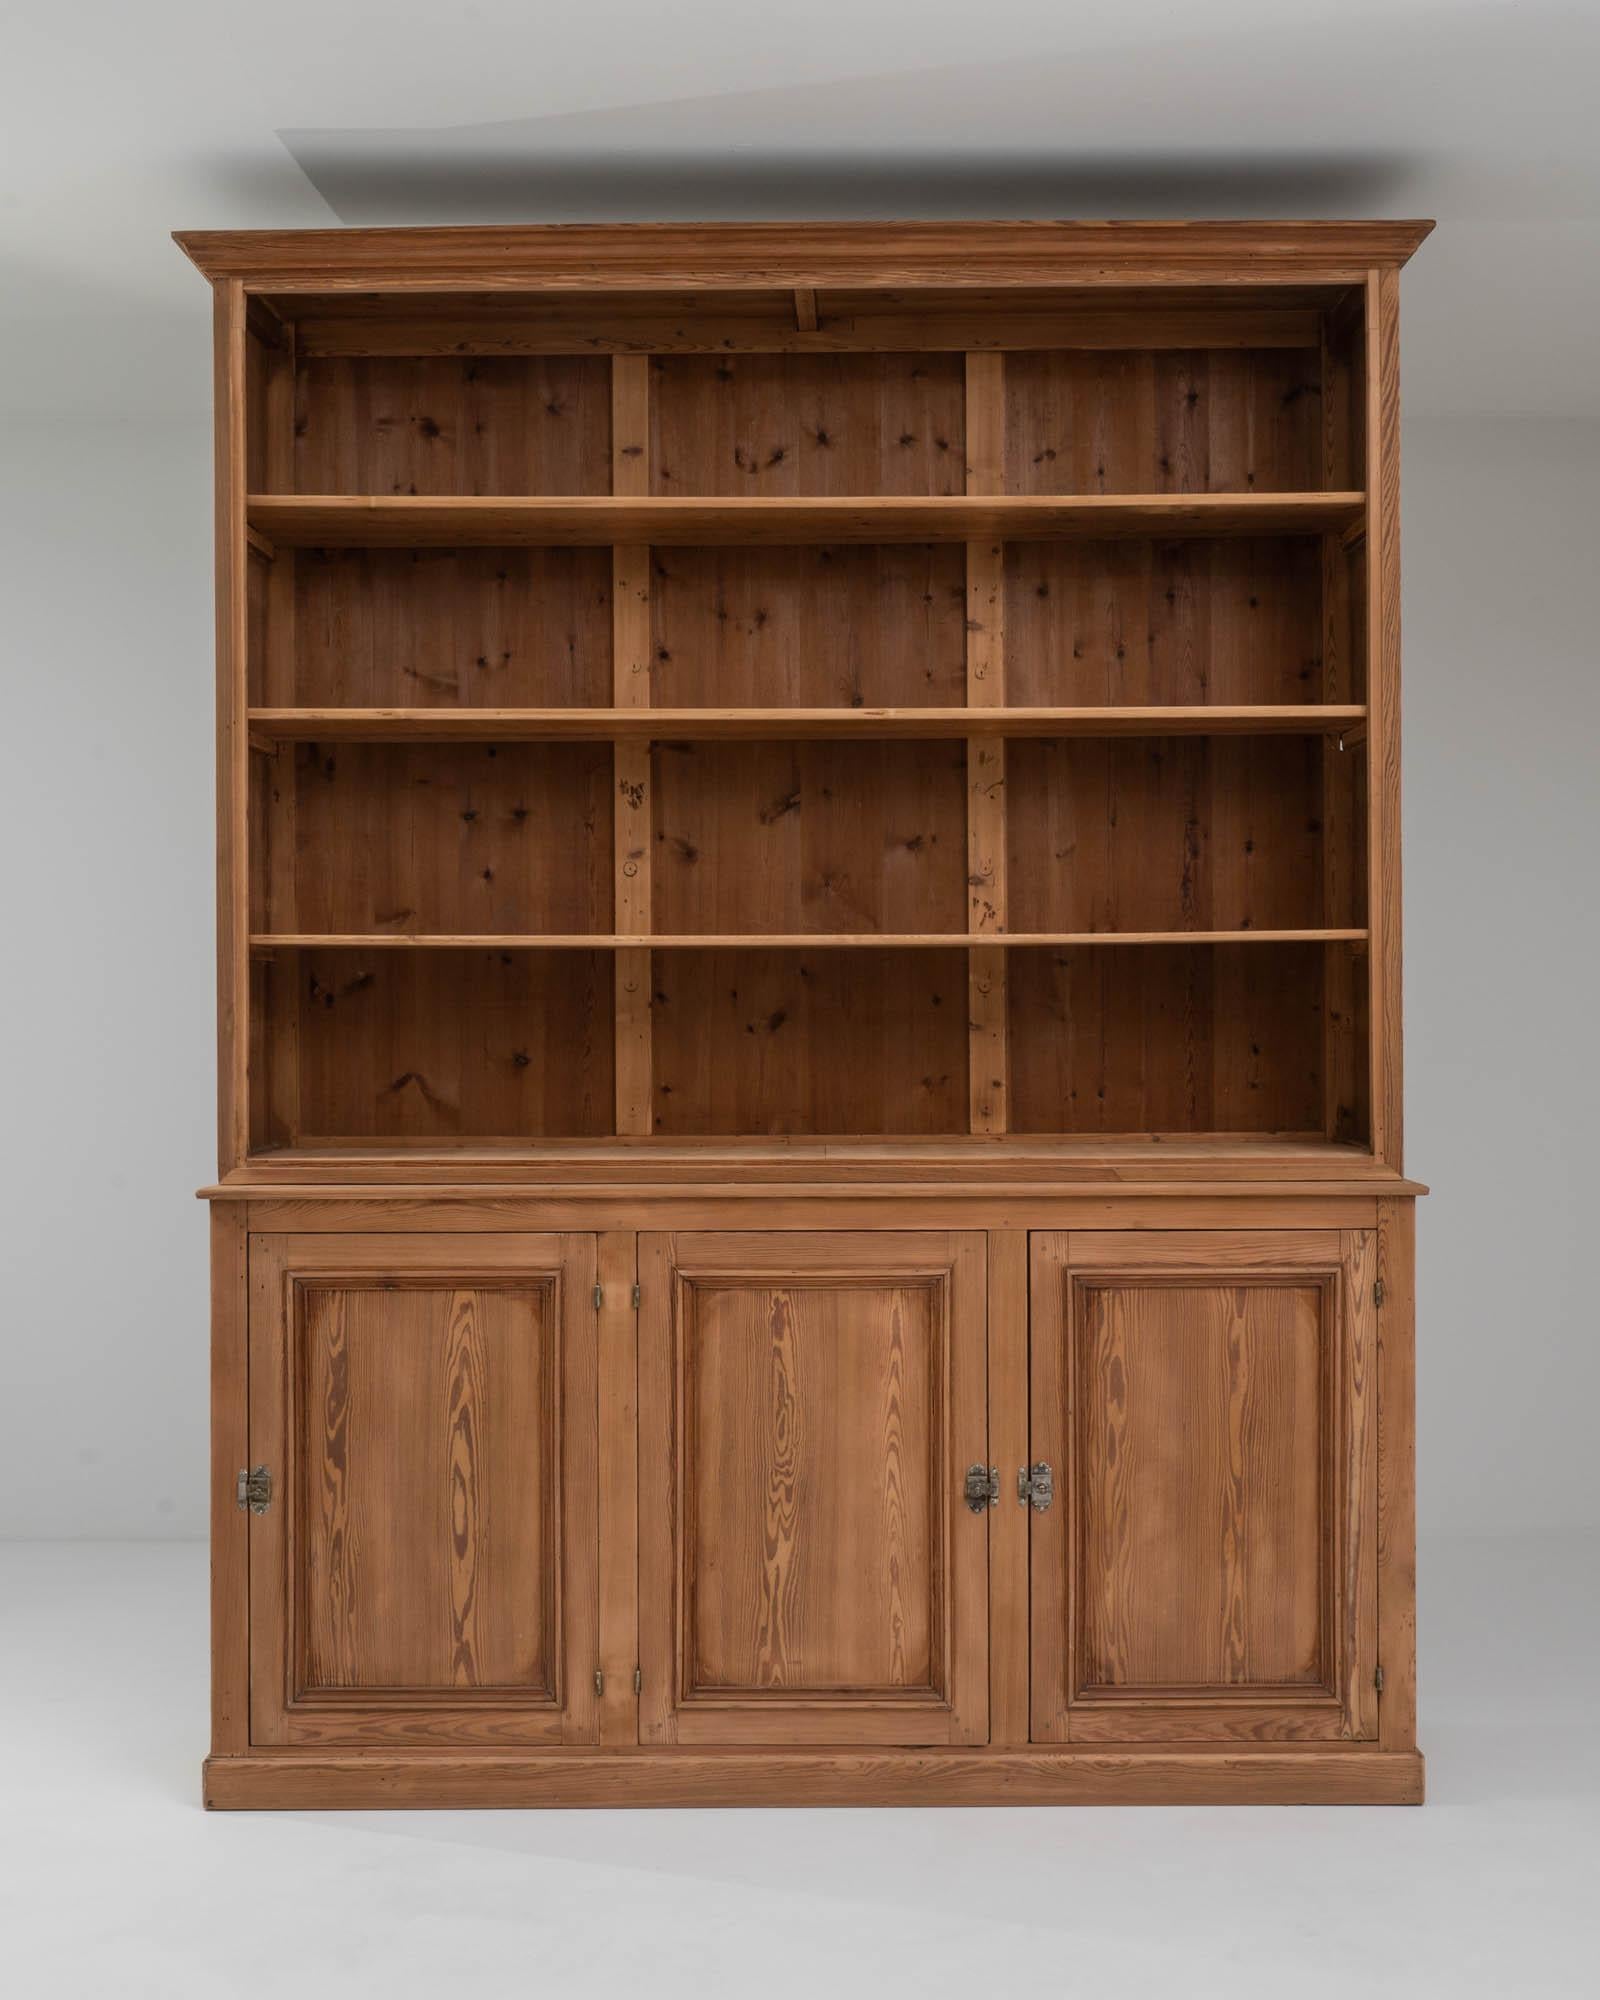 This pair of vintage wooden library cabinets would make a distinguished addition to a book-lined office or personal study. Made in France at the turn of the century, the cabinets are tall and broad: long shelves provide plenty of room for organizing